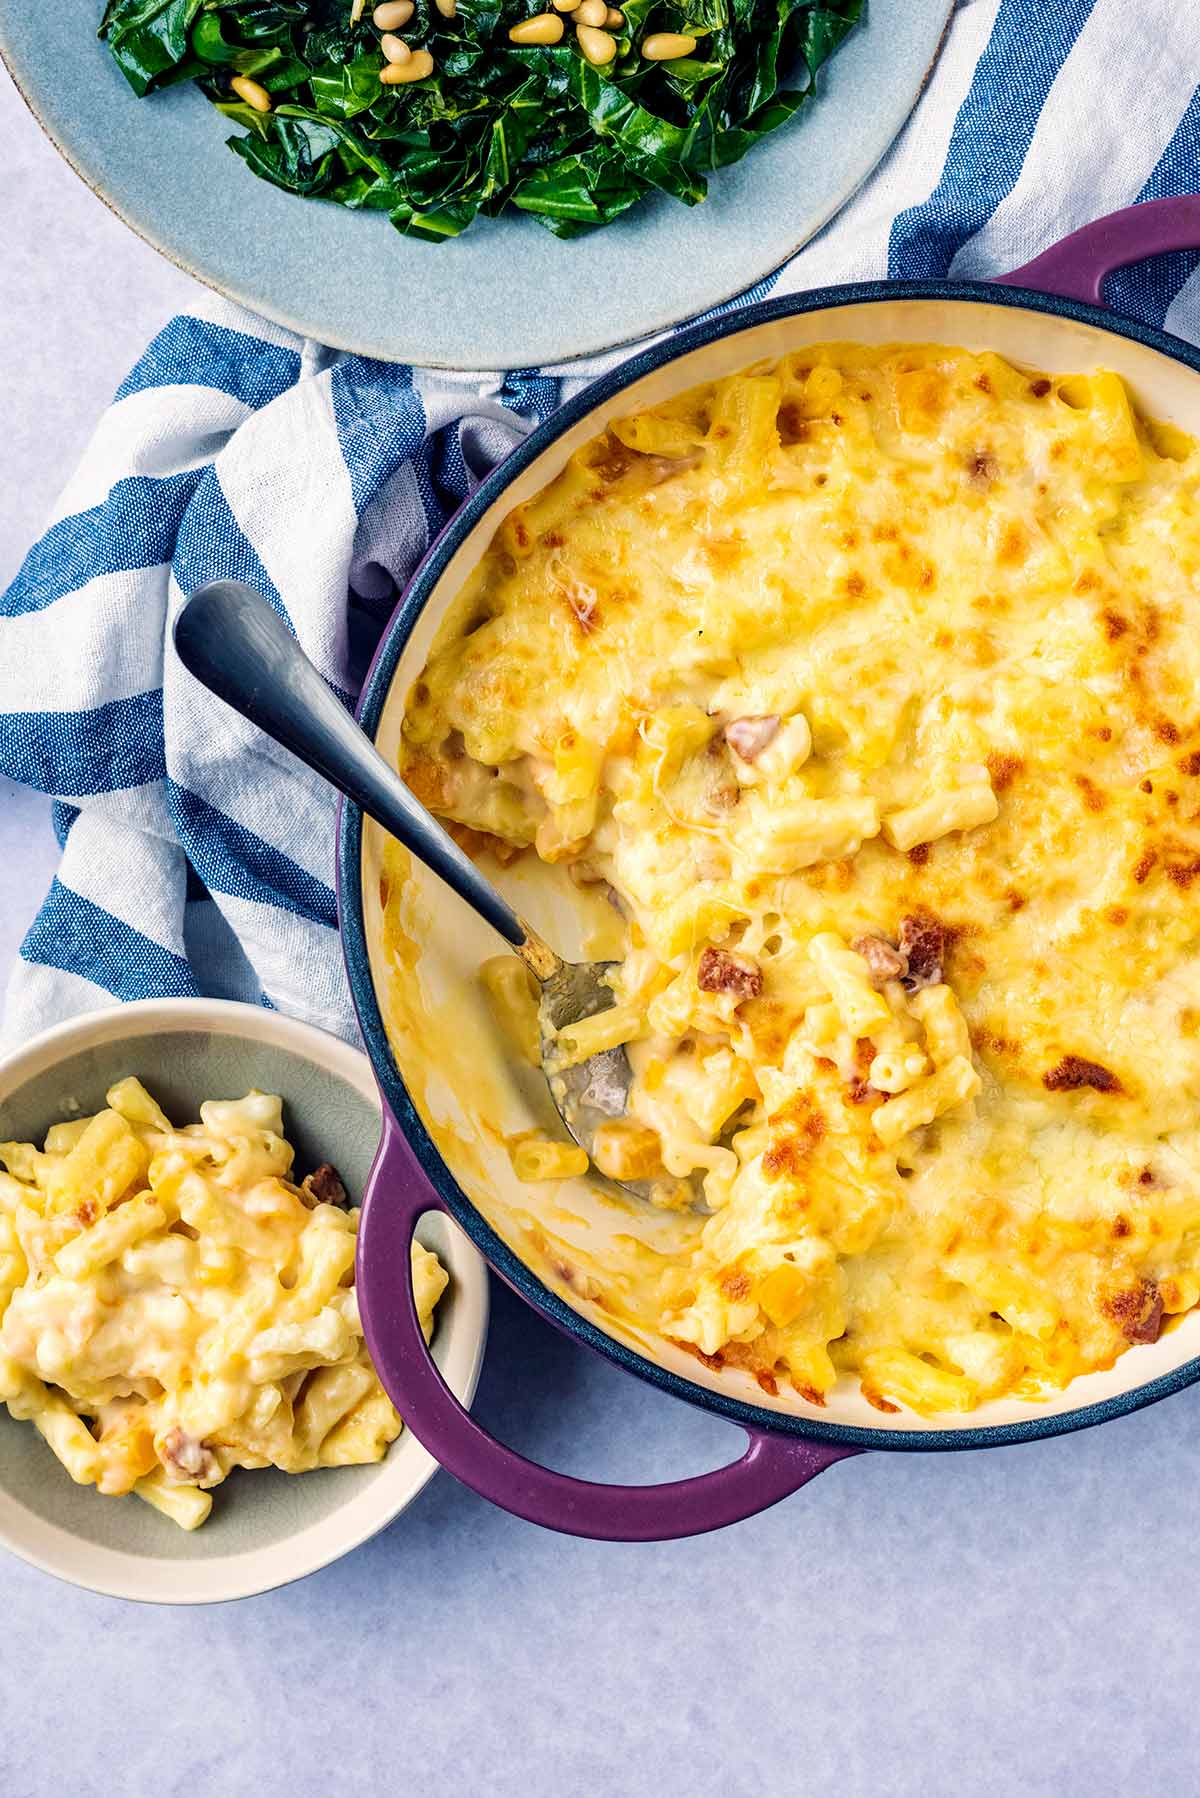 A large dish full of macaroni cheese with a portion removed and put in a small bowl.